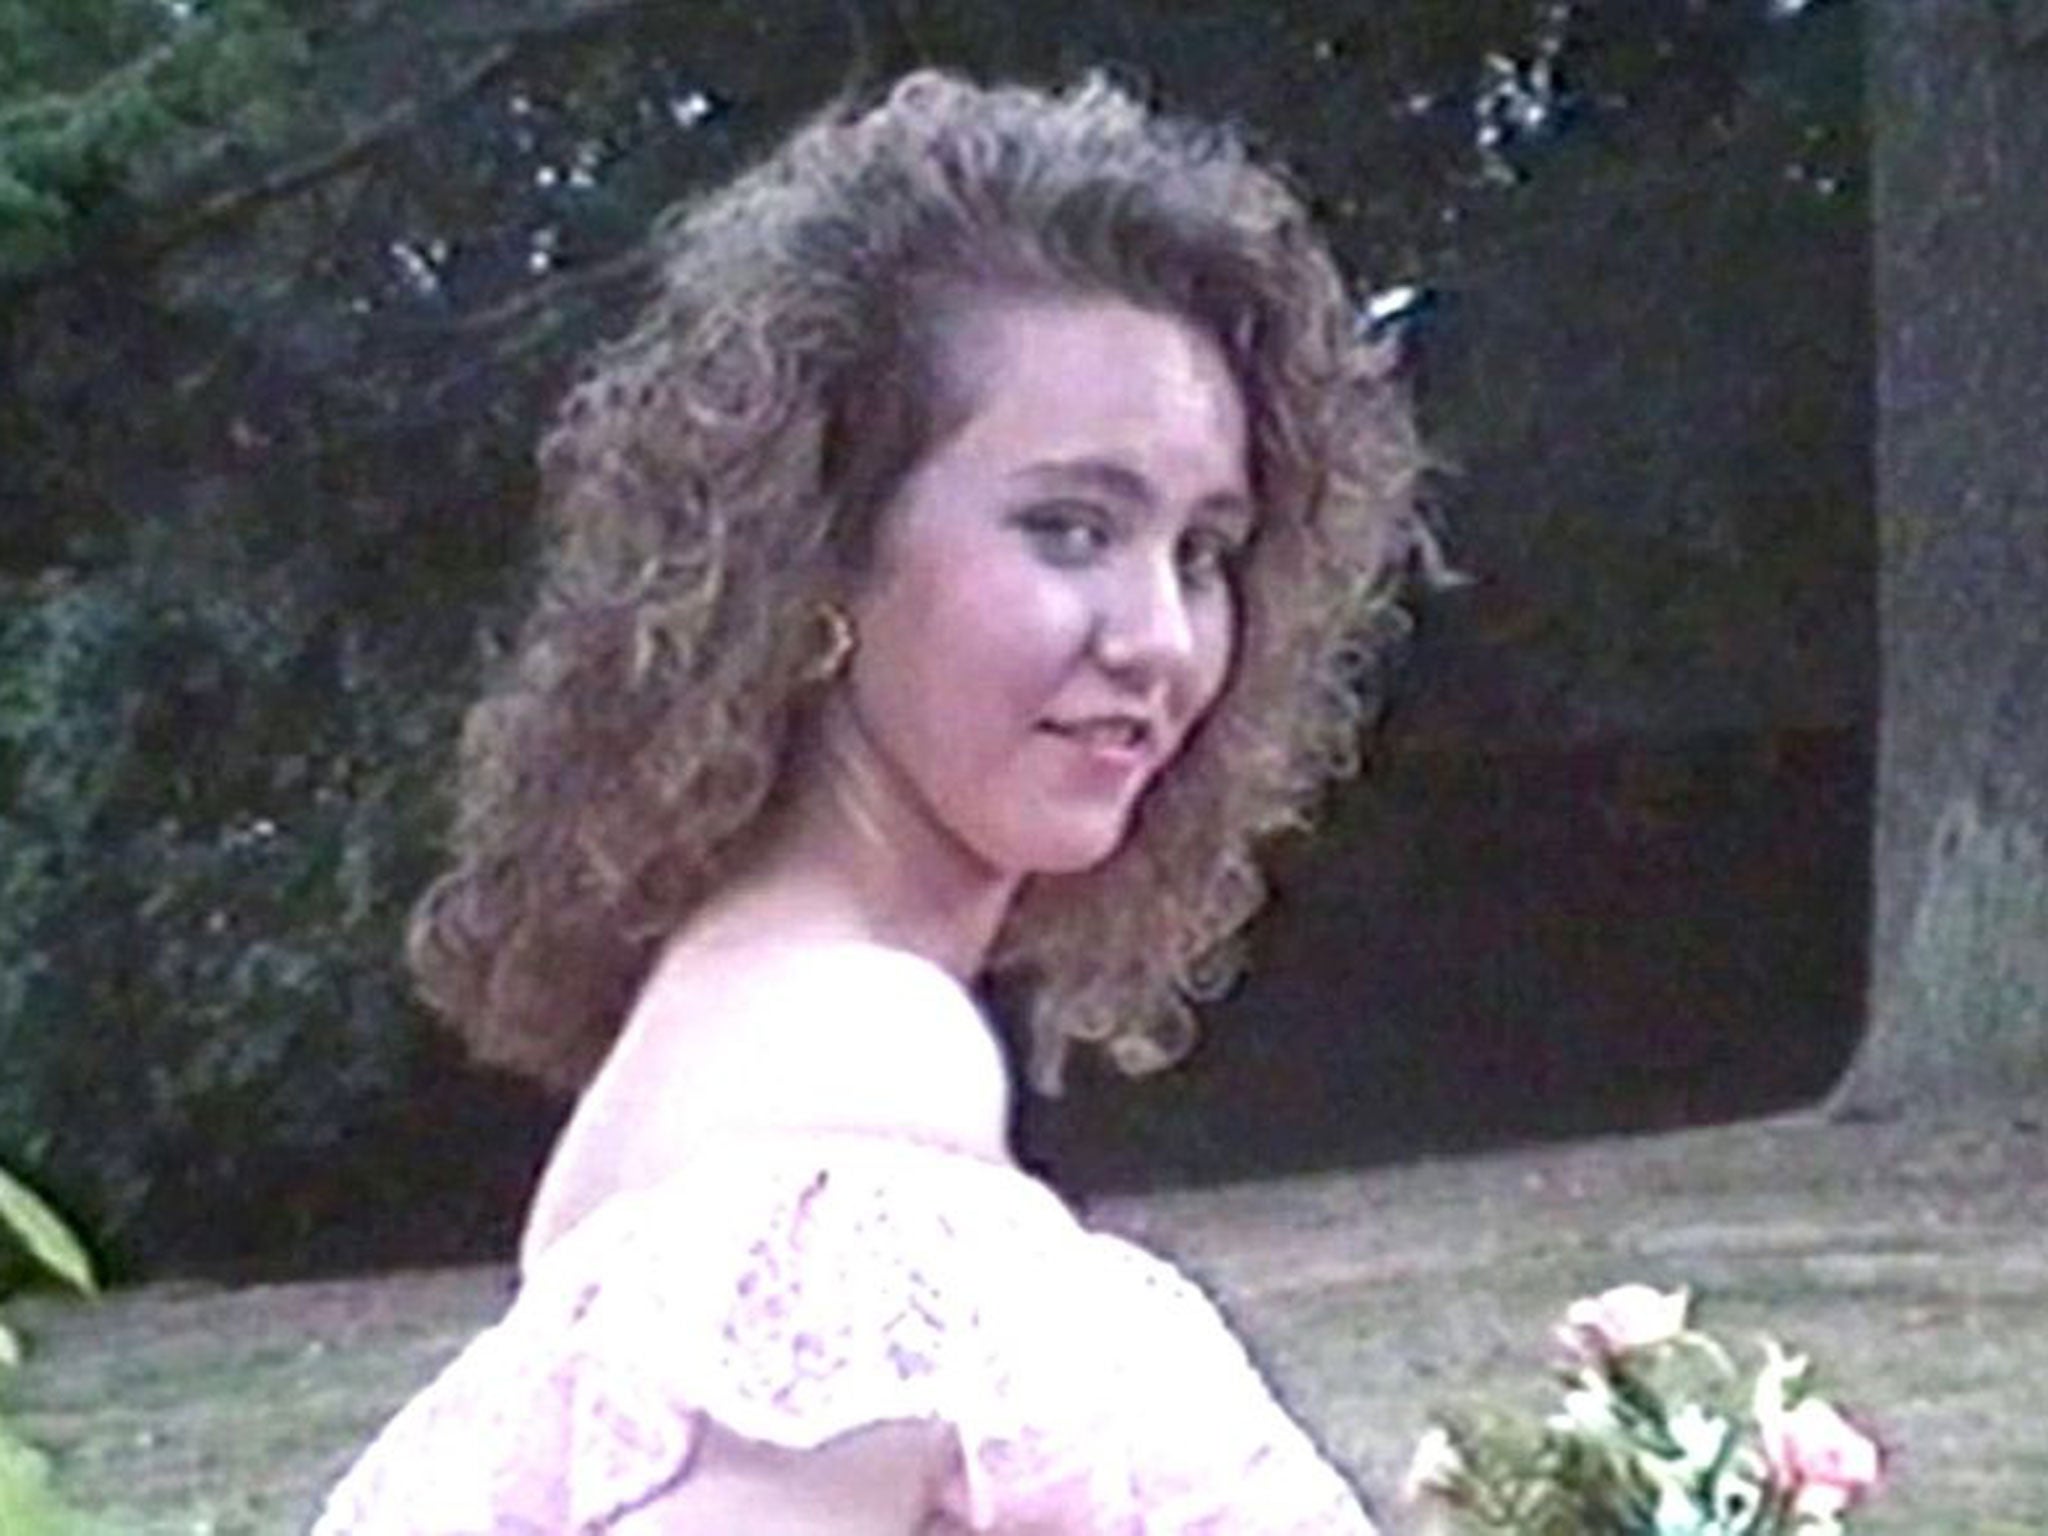 Nicola Payne disappeared aged 18 in 1991.